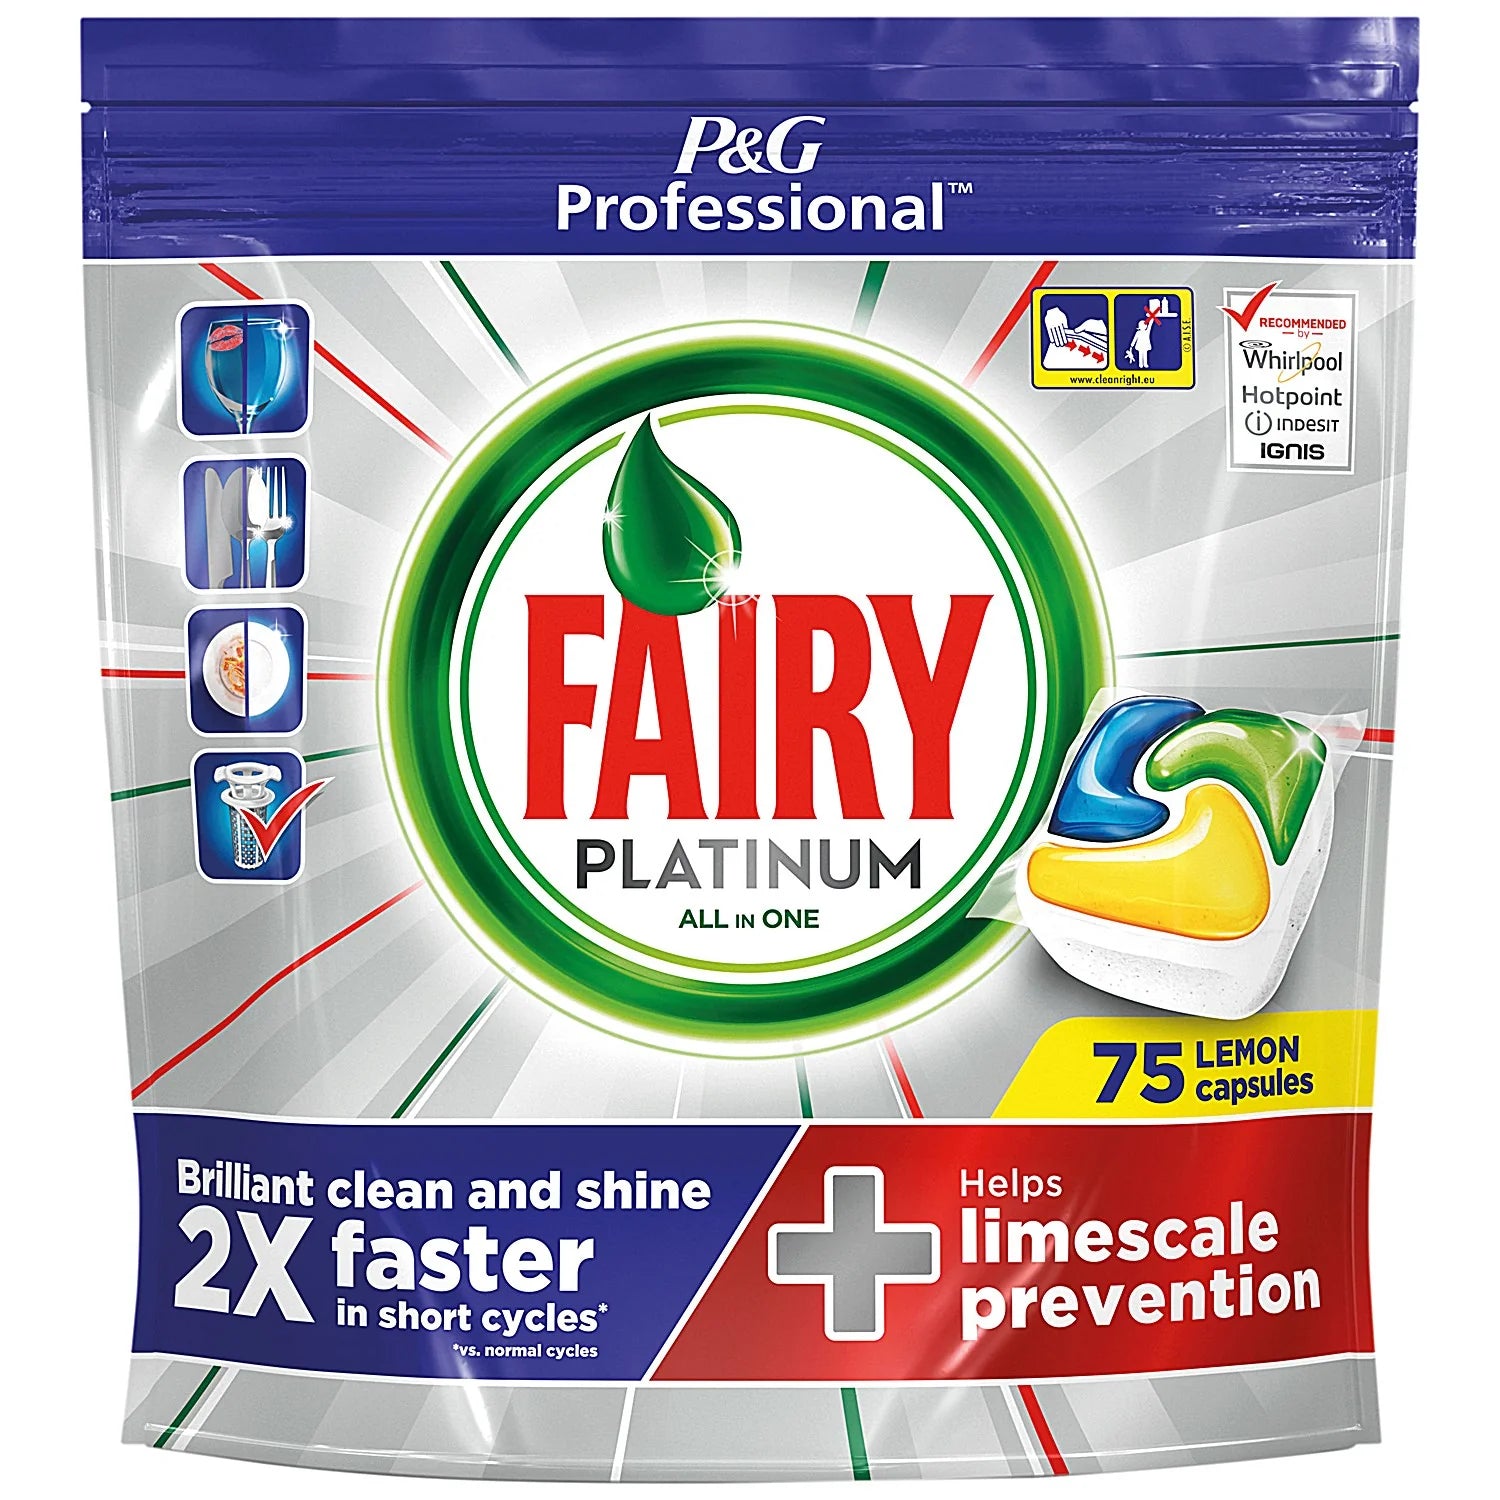 Fairy Platinum All in One Dishwasher Tablets Regular - 75 Capsules